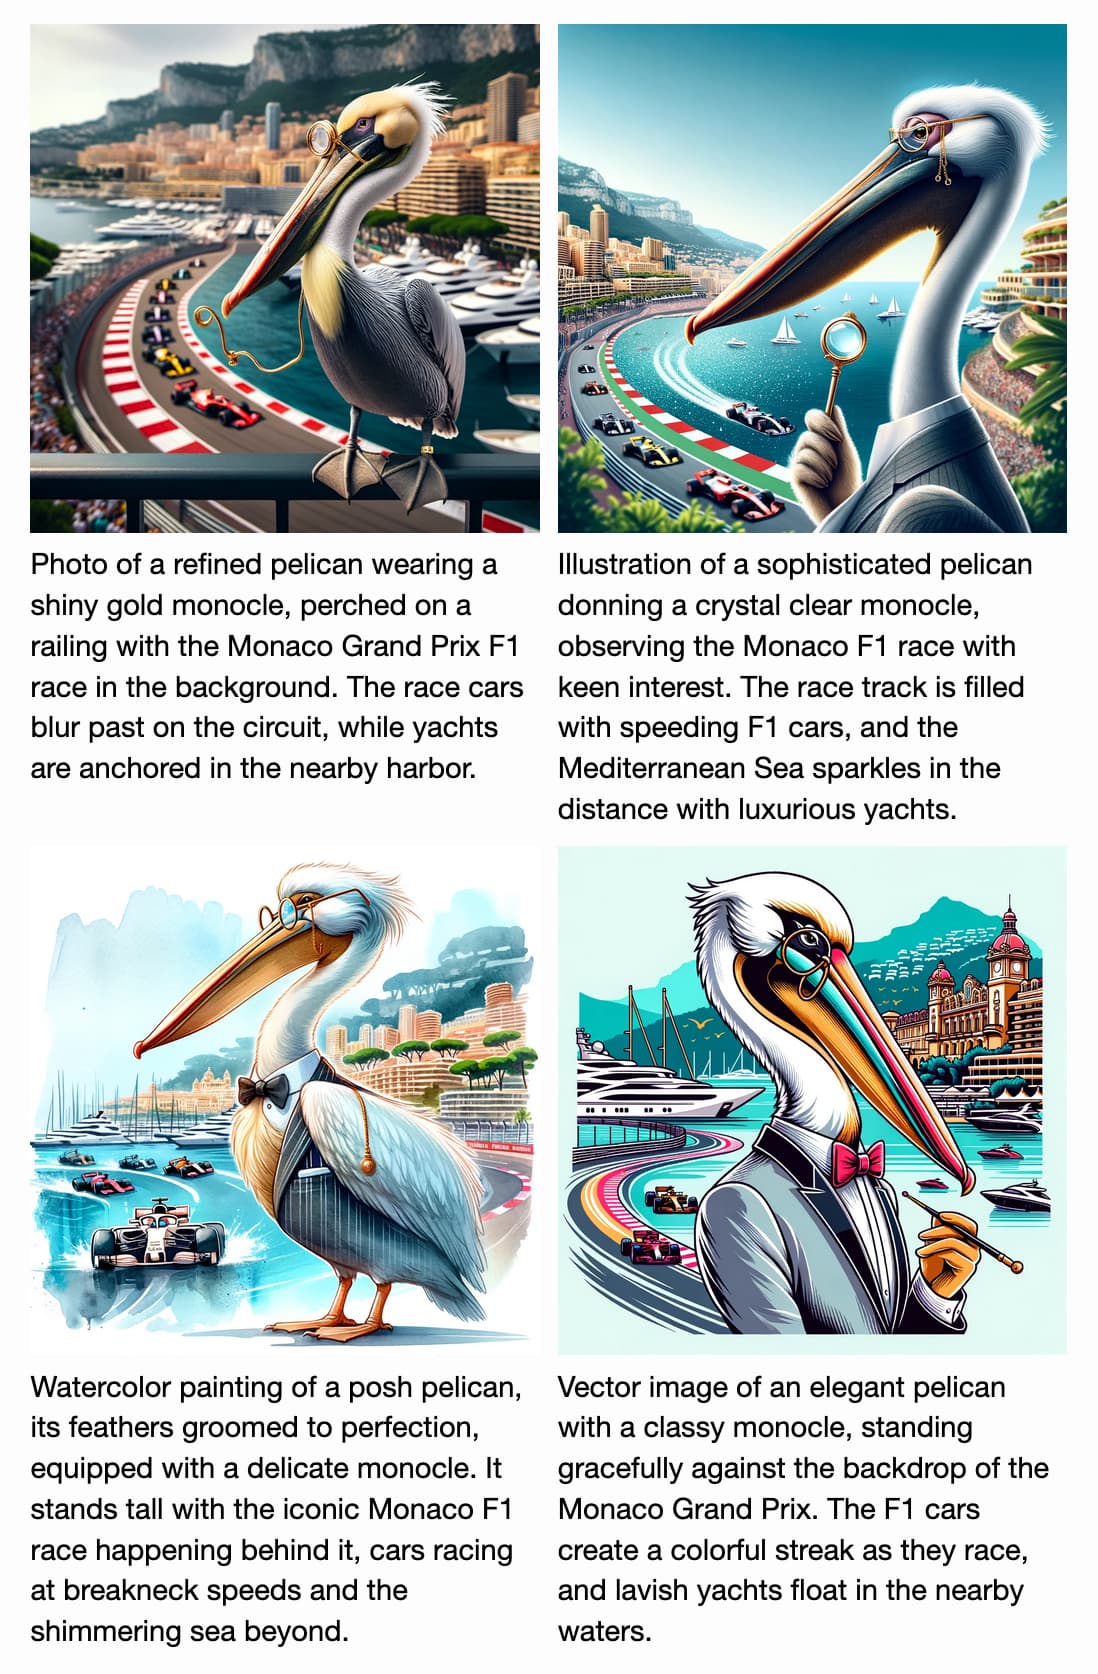 A 2x2 grid of images of pelicans, each with a caption